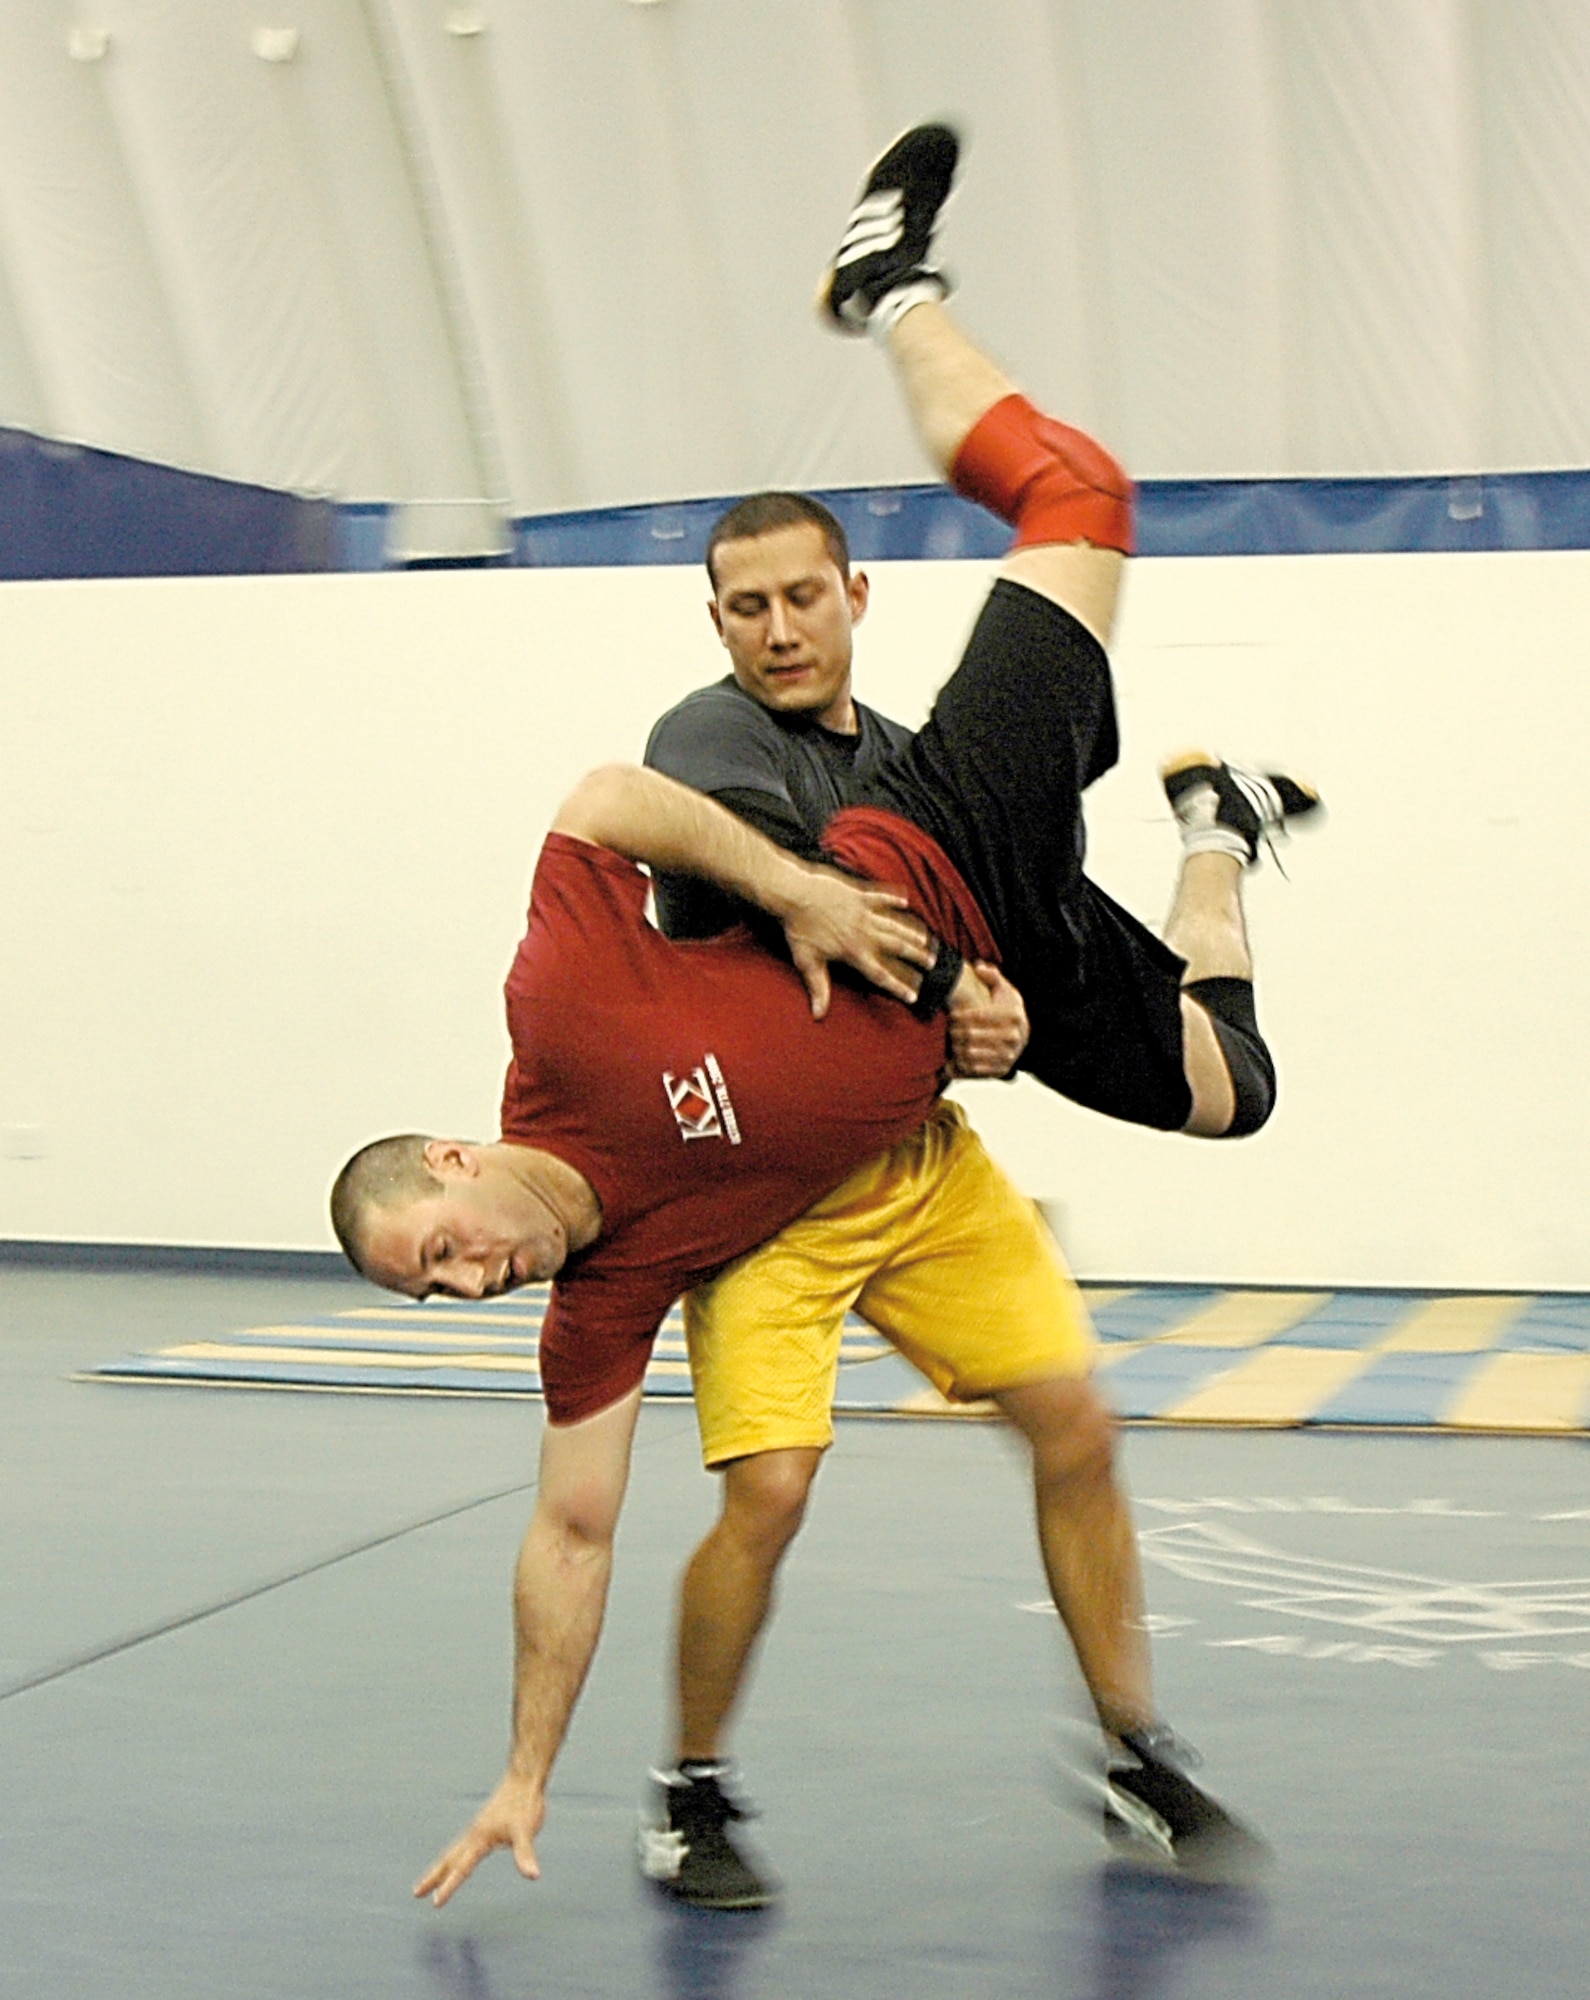 Airman 1st Class Enrique Gaitan, 388th Equipment Maintenance Squadron Knowledge Operations manager, performs a gut-wrench on Airman 1st Class Robby Hedrick, 75th Air Base Wing Public Affairs specialist, during a wrestling practice Jan. 23.